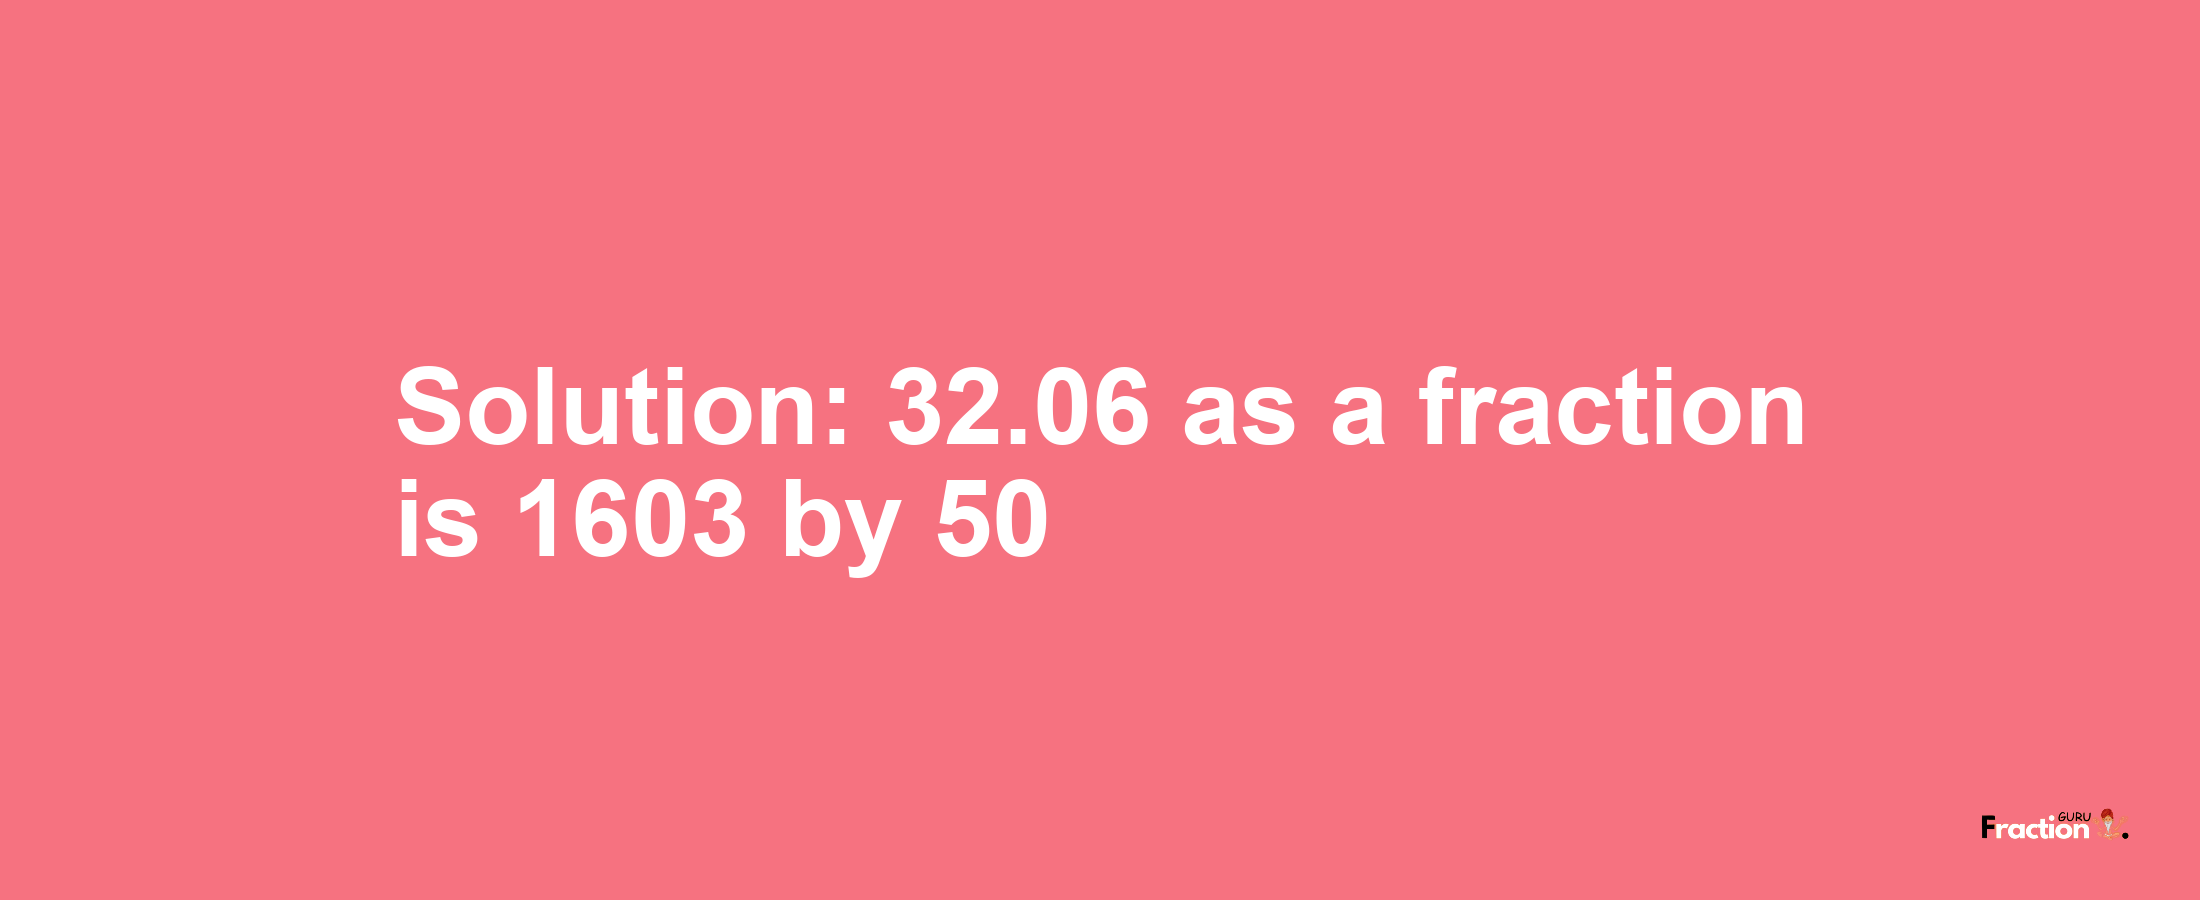 Solution:32.06 as a fraction is 1603/50